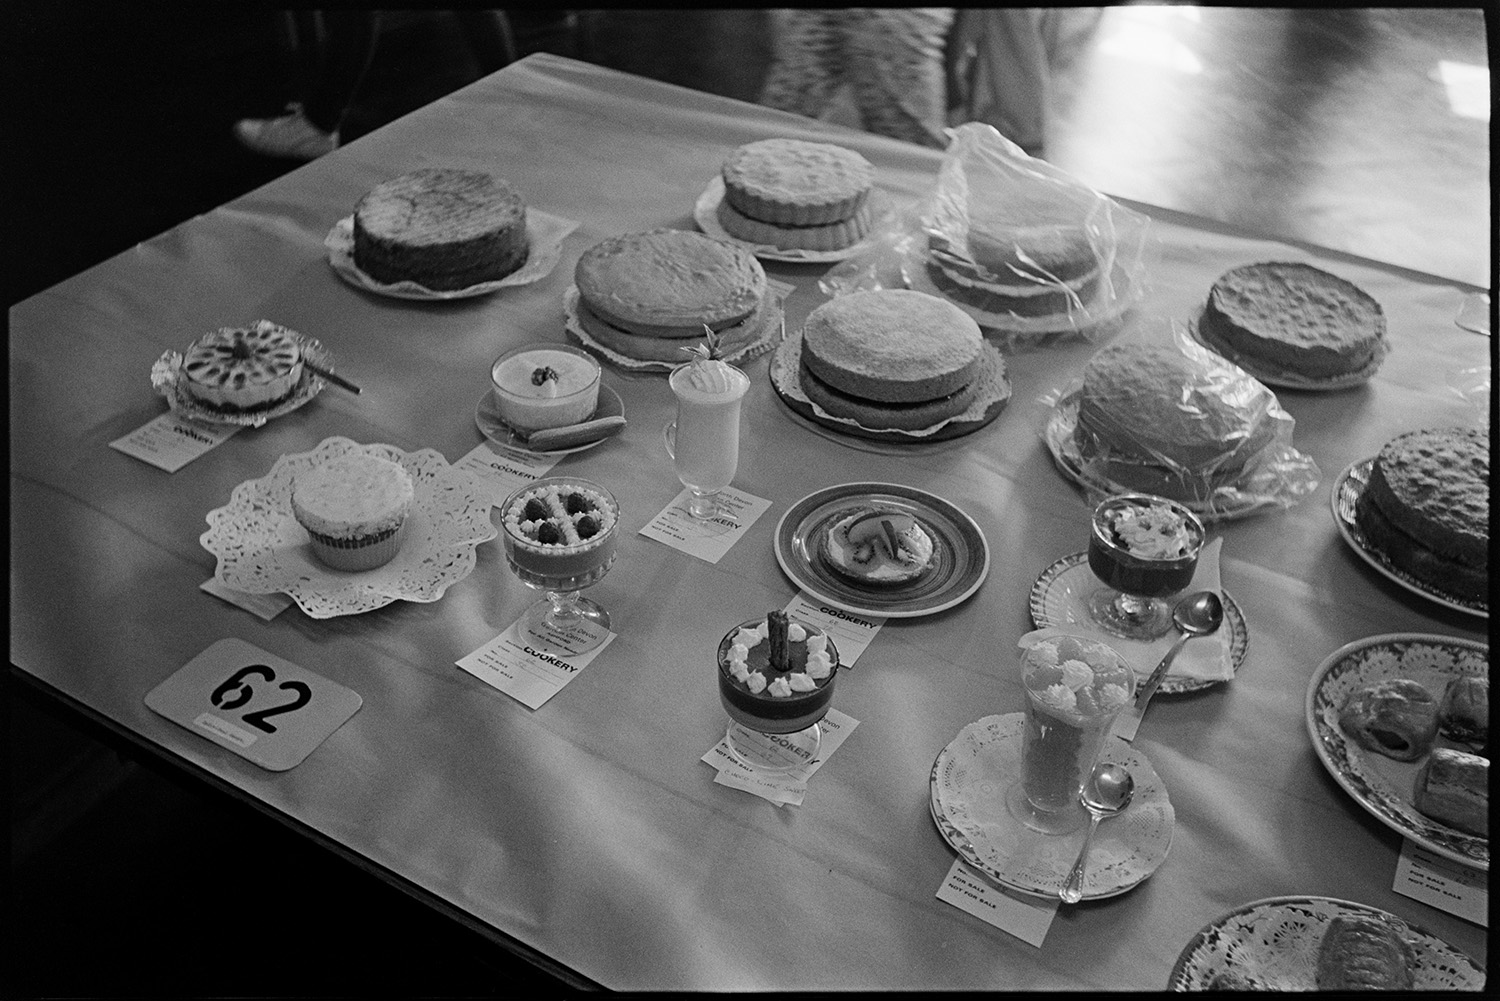 Flower show, displays of roses, cakes, vegetables, skittle alley.
[Display of cakes and desserts on a table at the Dolton Flower Show, in the village hall, for the cookery competition. A range of sponge cakes, various dessert dishes, and sausage rolls are displayed.]